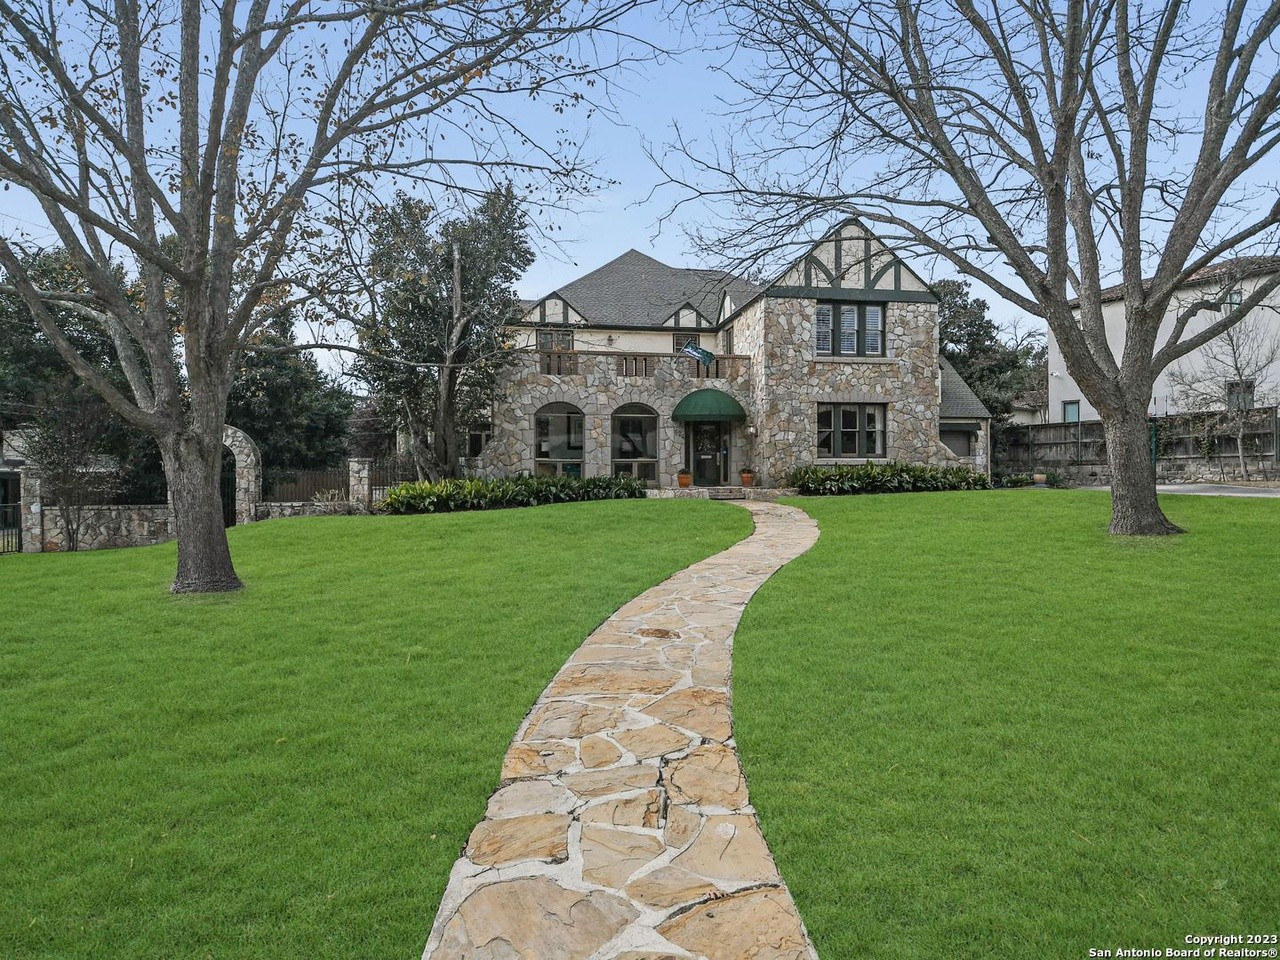 A stone mansion in San Antonio's Olmos Park area with 3 second-floor balconies is now for sale